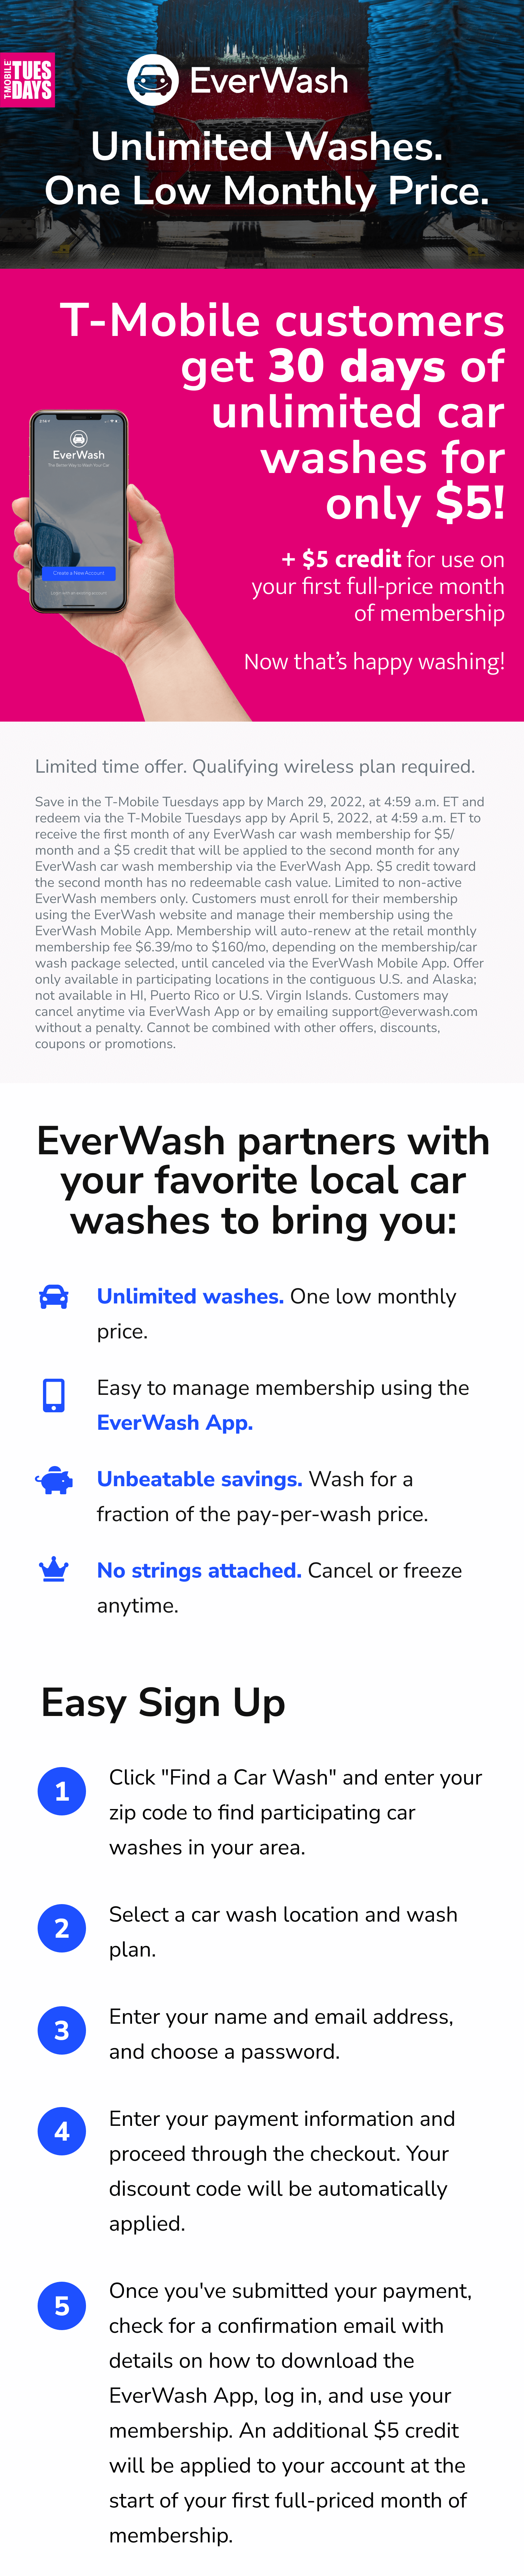 EverWash T-Mobile Tuesday 30 days of unlimited car washes for only $5!